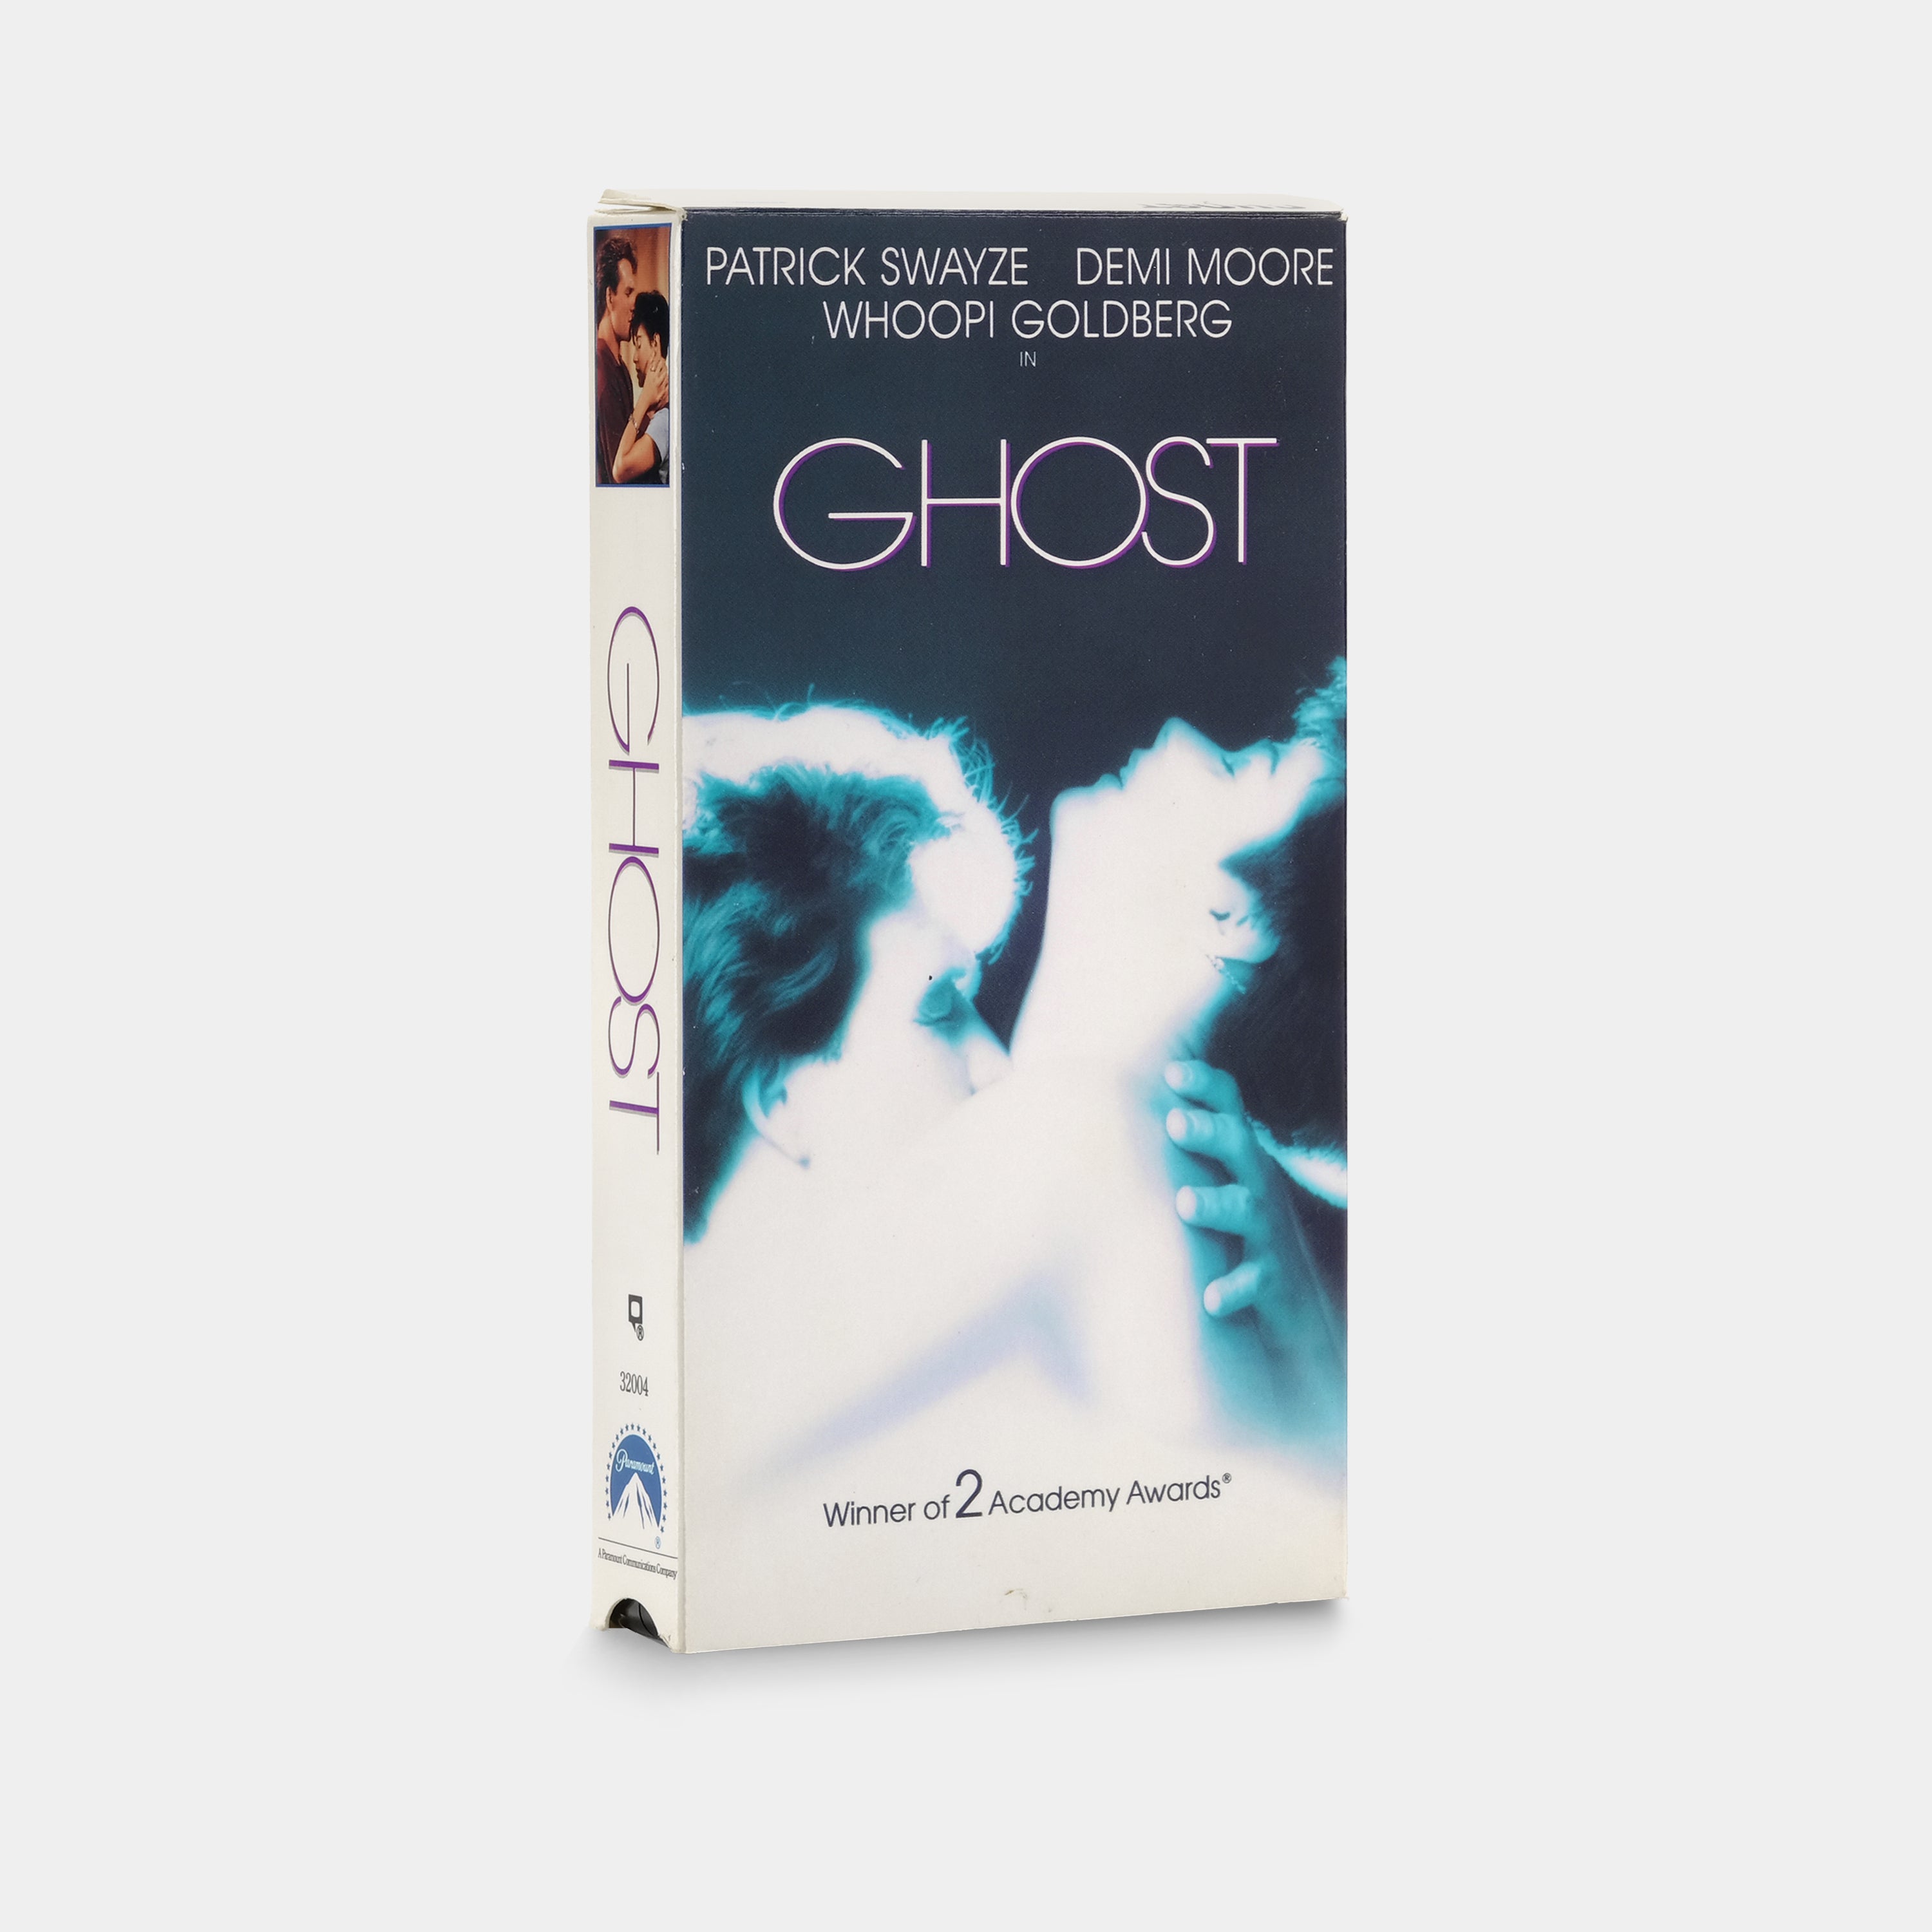 Ghost 1990, directed by Jerry Zucker